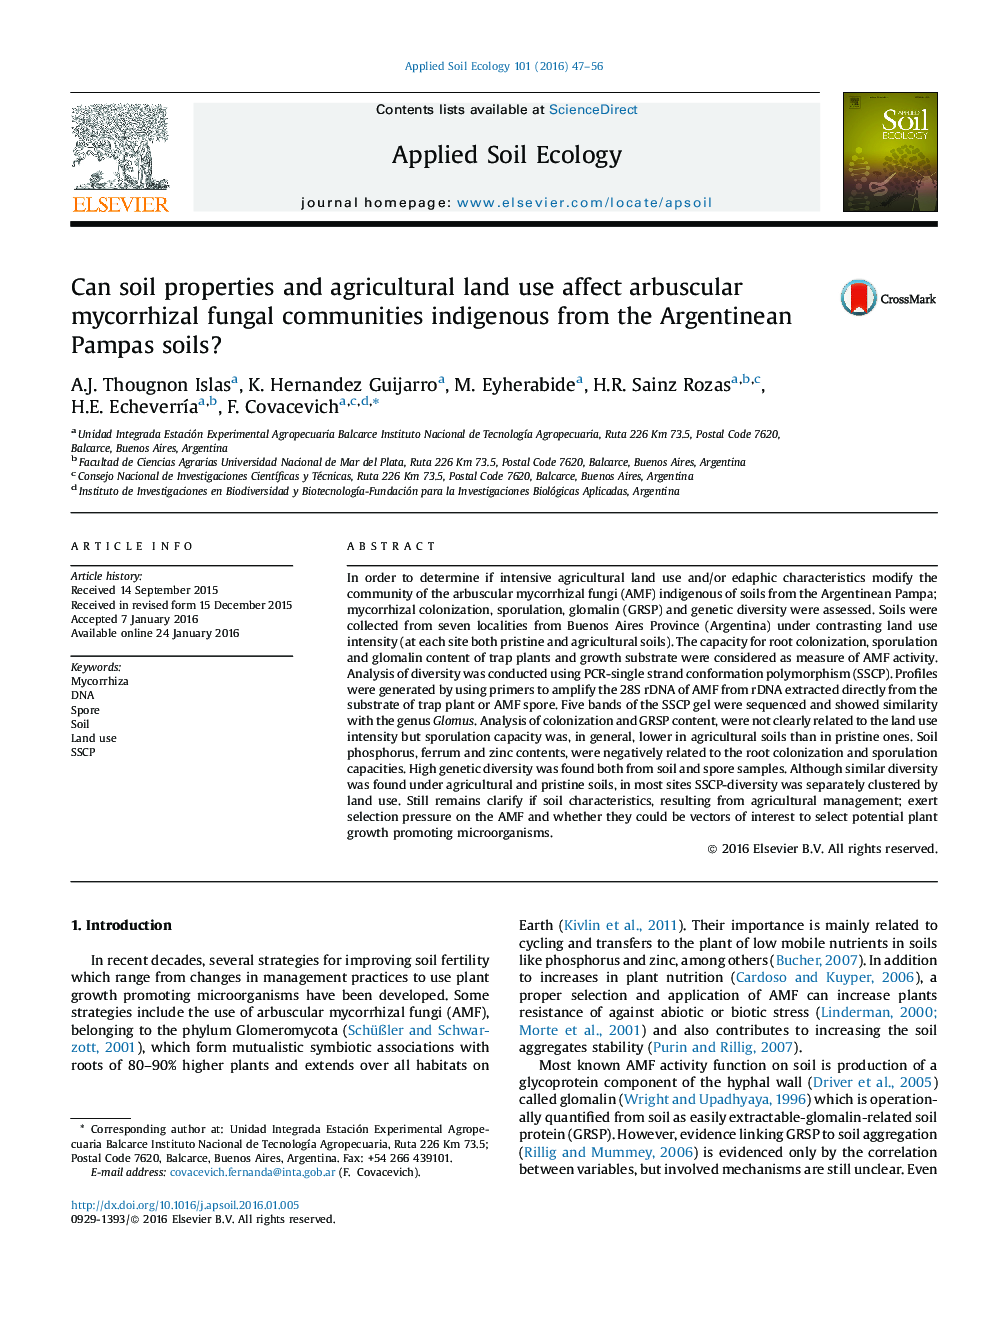 Can soil properties and agricultural land use affect arbuscular mycorrhizal fungal communities indigenous from the Argentinean Pampas soils?